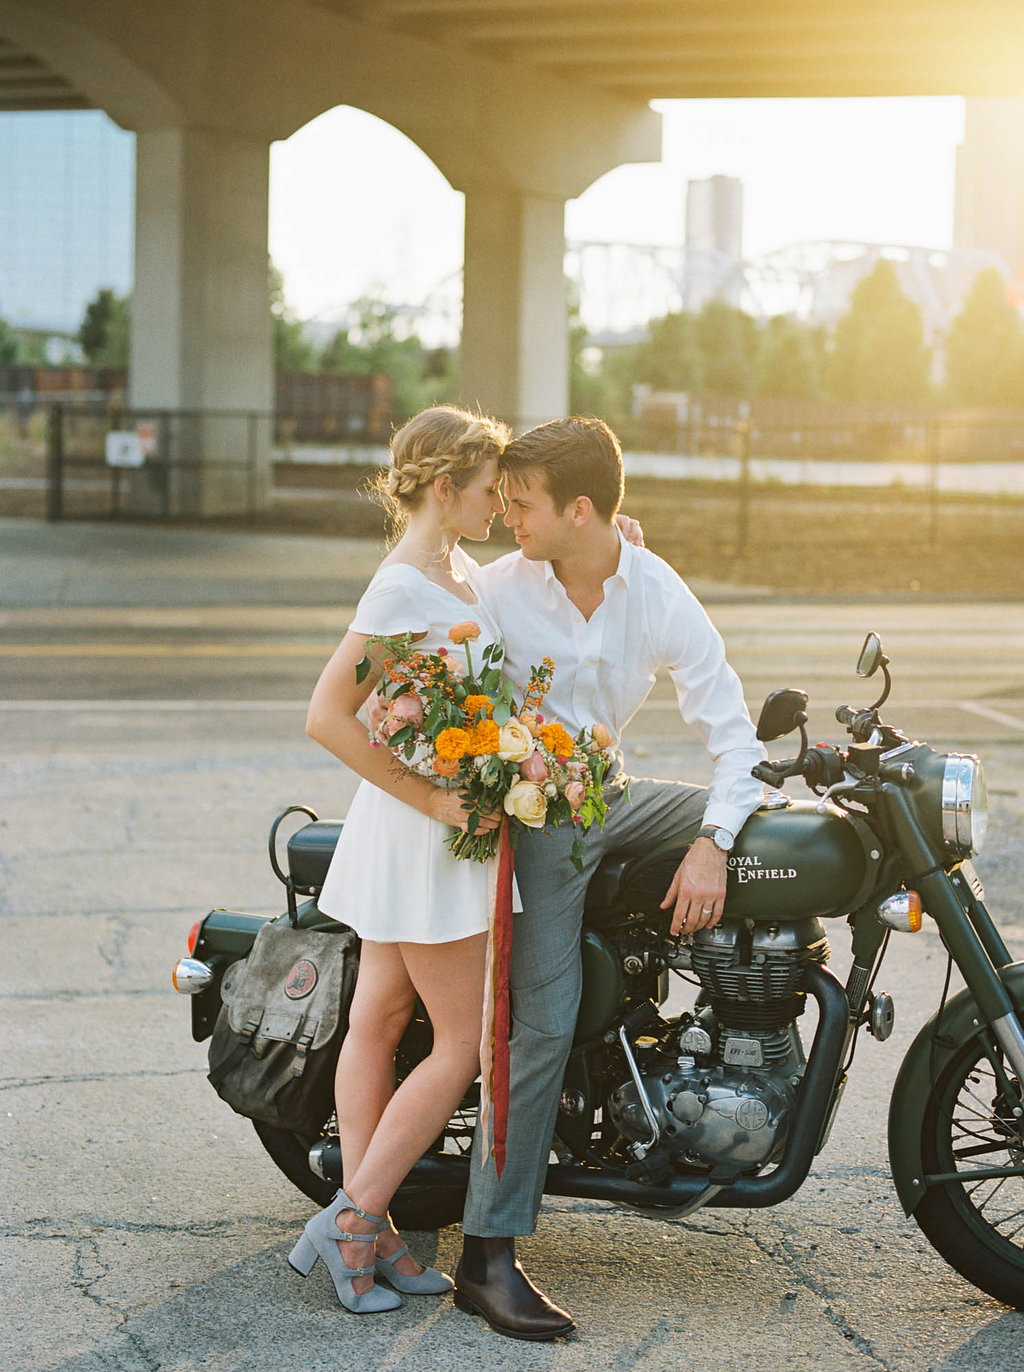 Retro elopement wedding inspiration with a motorcycle and colorful flowers // Nashville Wedding Florist